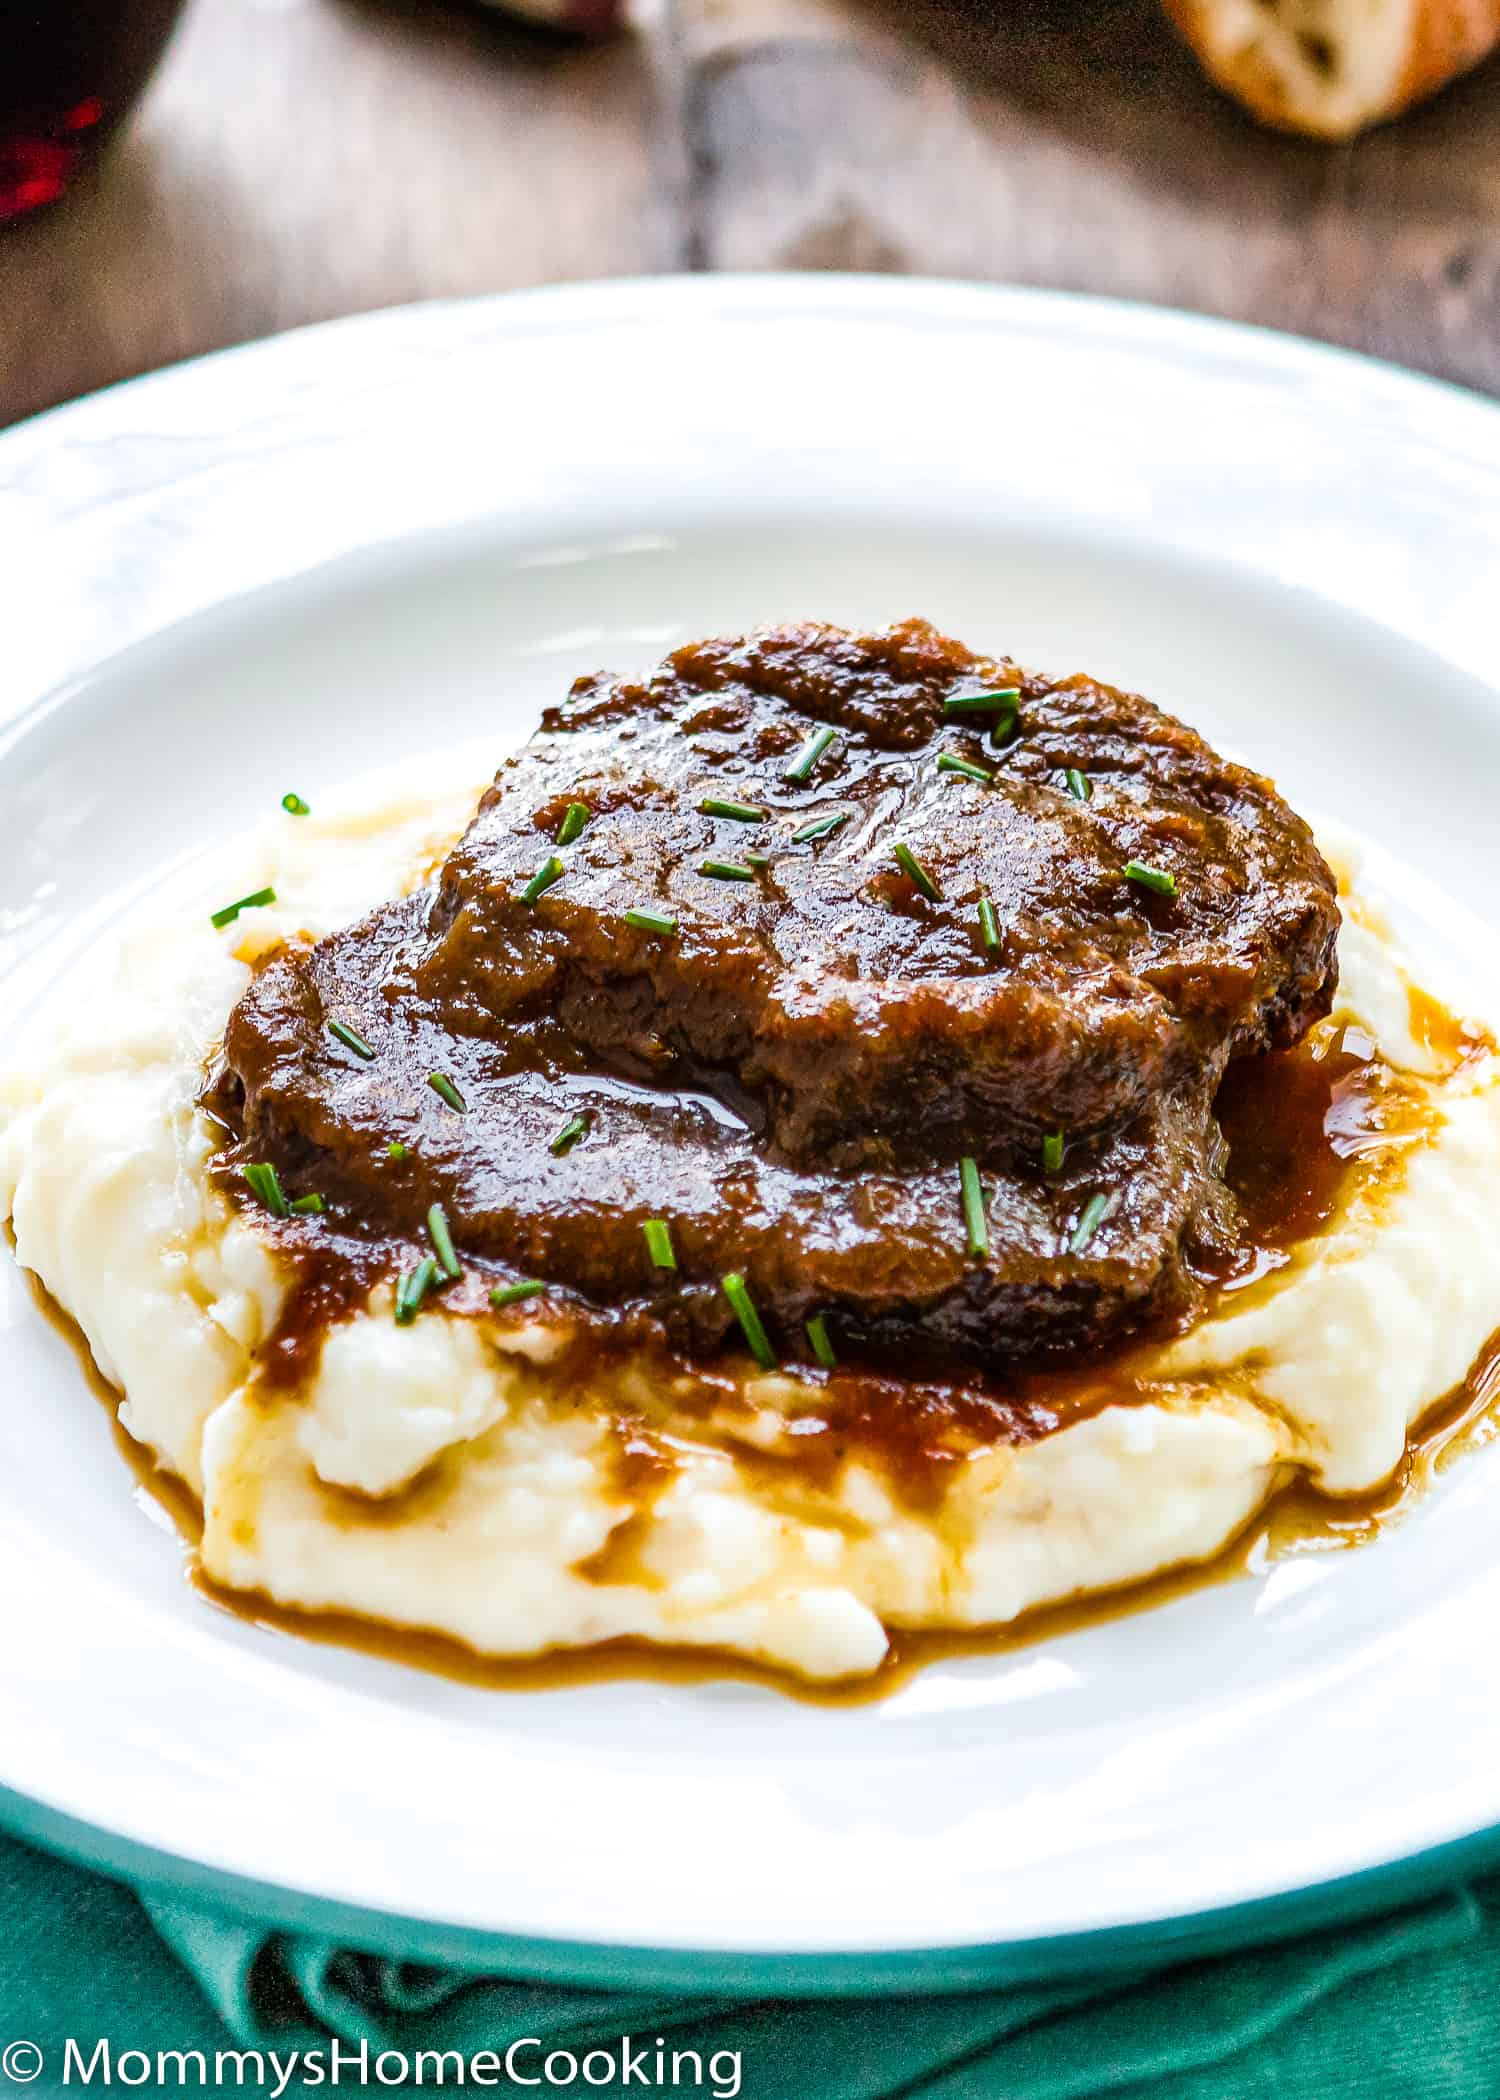 two slices of Venezuelan Asado Negro with sauce over mashed potatoes on white plate.